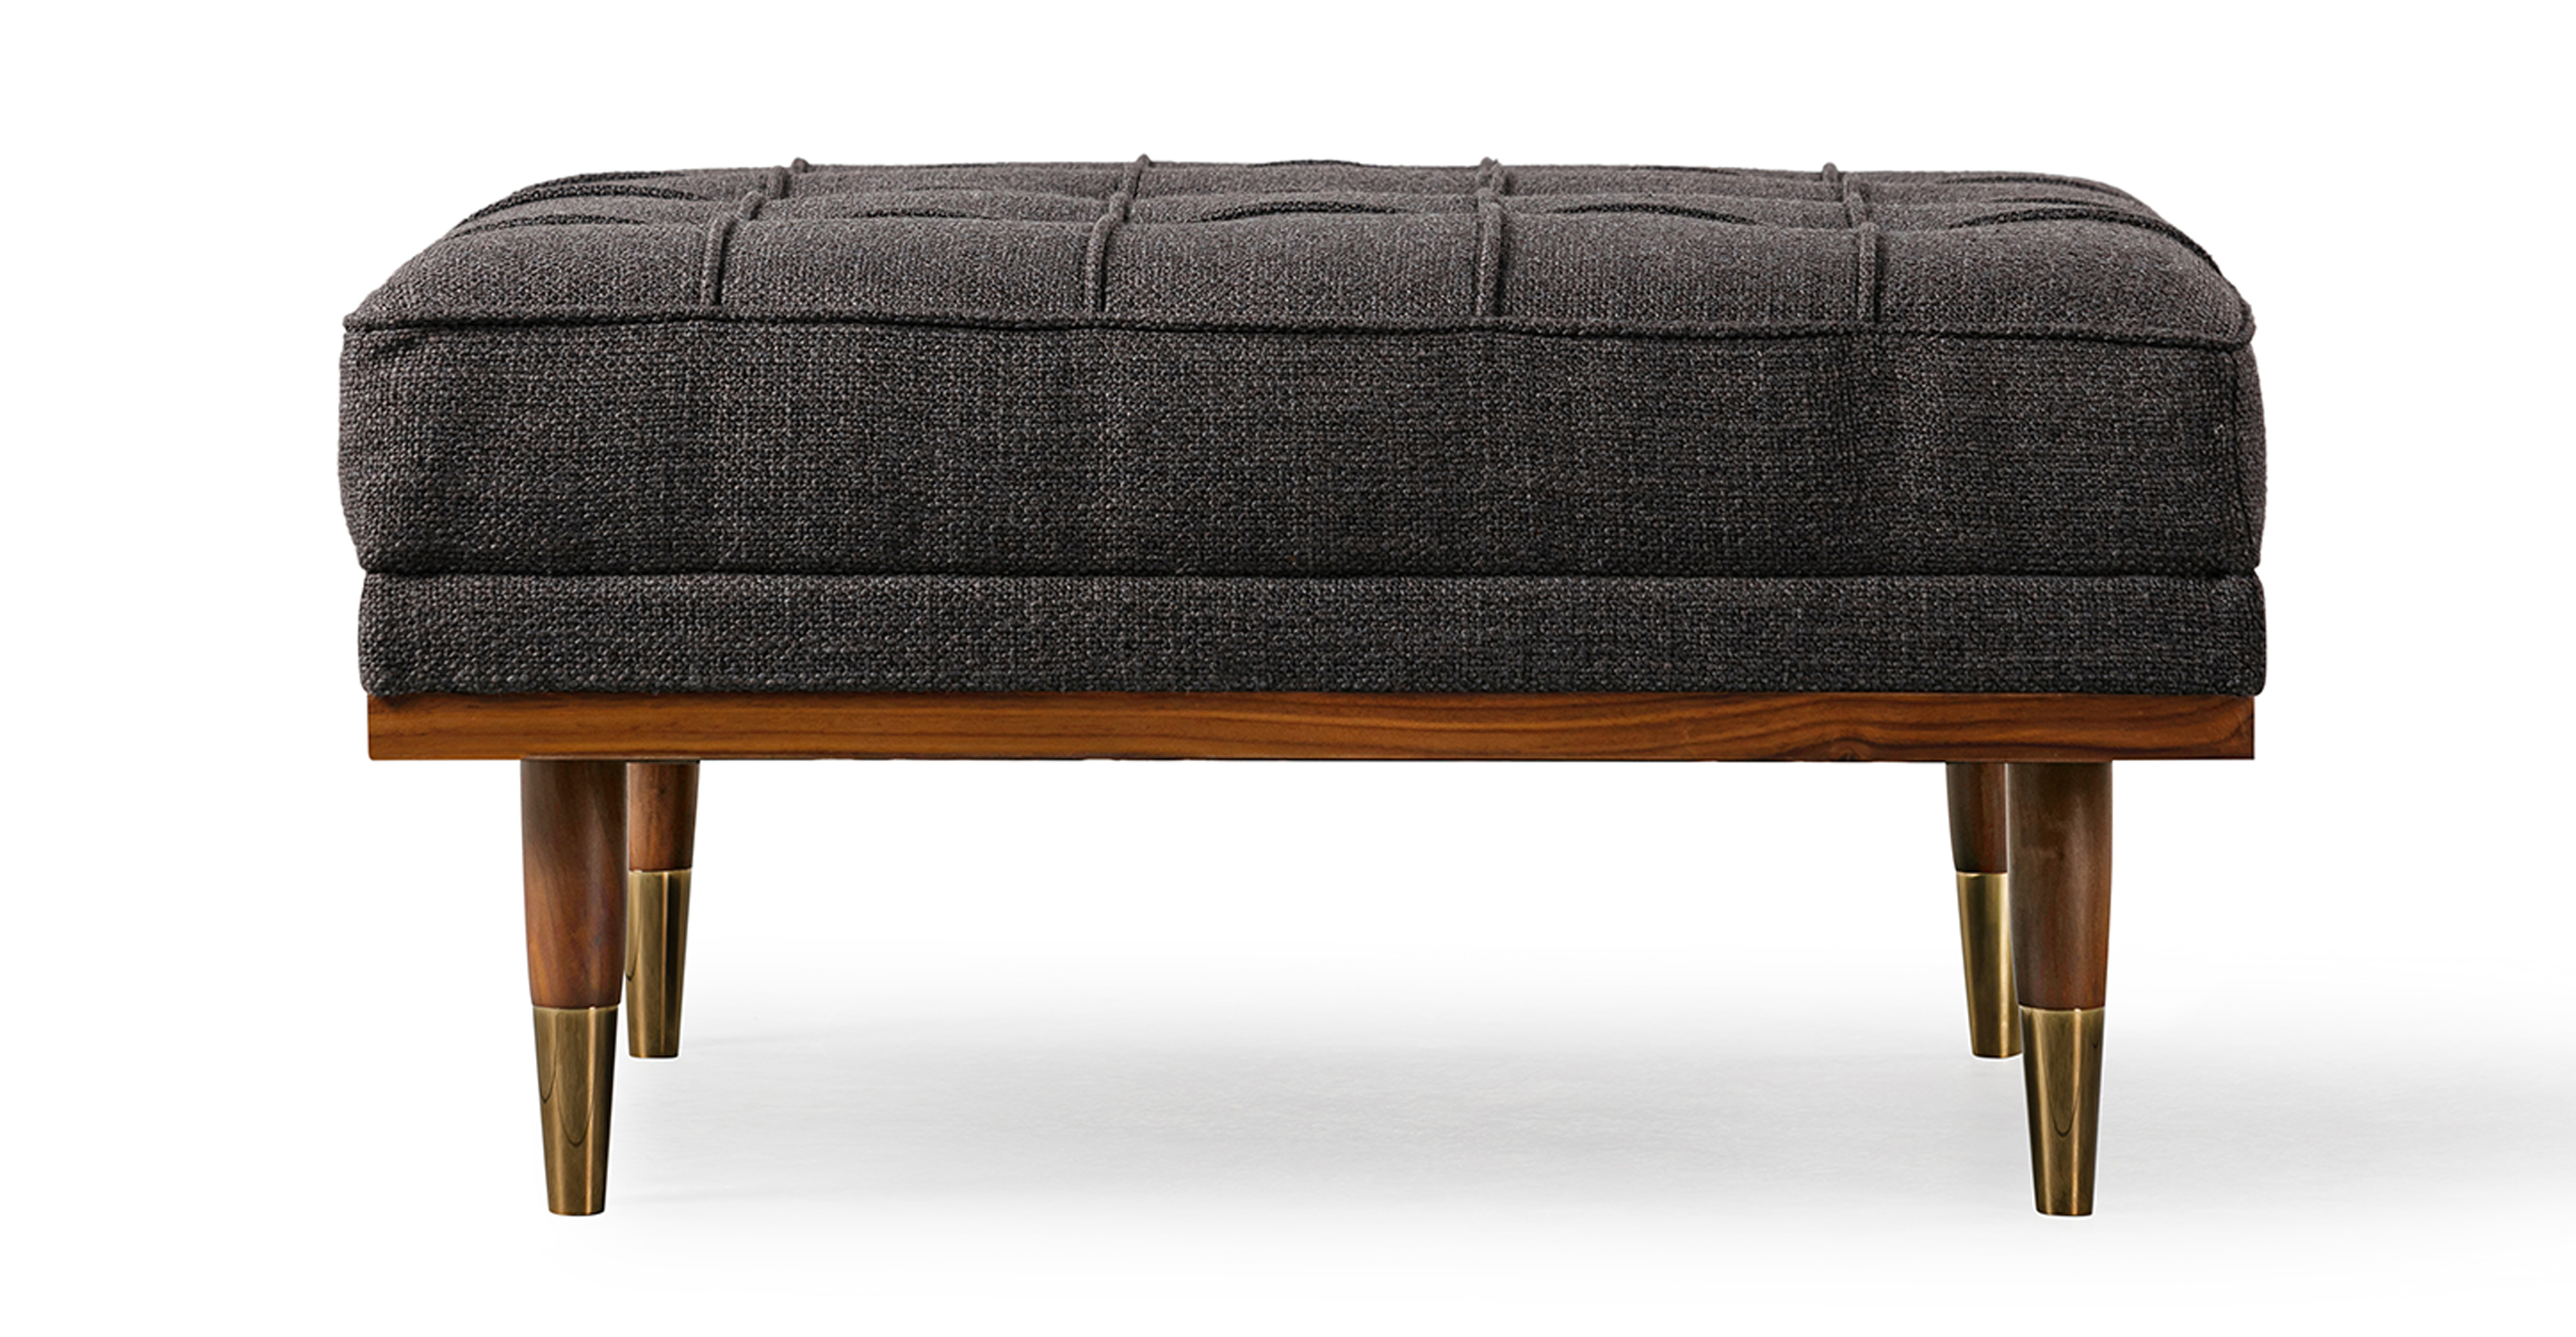 Image shows side picture of Mid-Century Modern Woodrow Box Ottoman in Elyx Belgian Woven Dior Grey Fabric. Frame and legs are walnut wood. Legs are brass tipped walnut wood. The cushion is button tufted. 